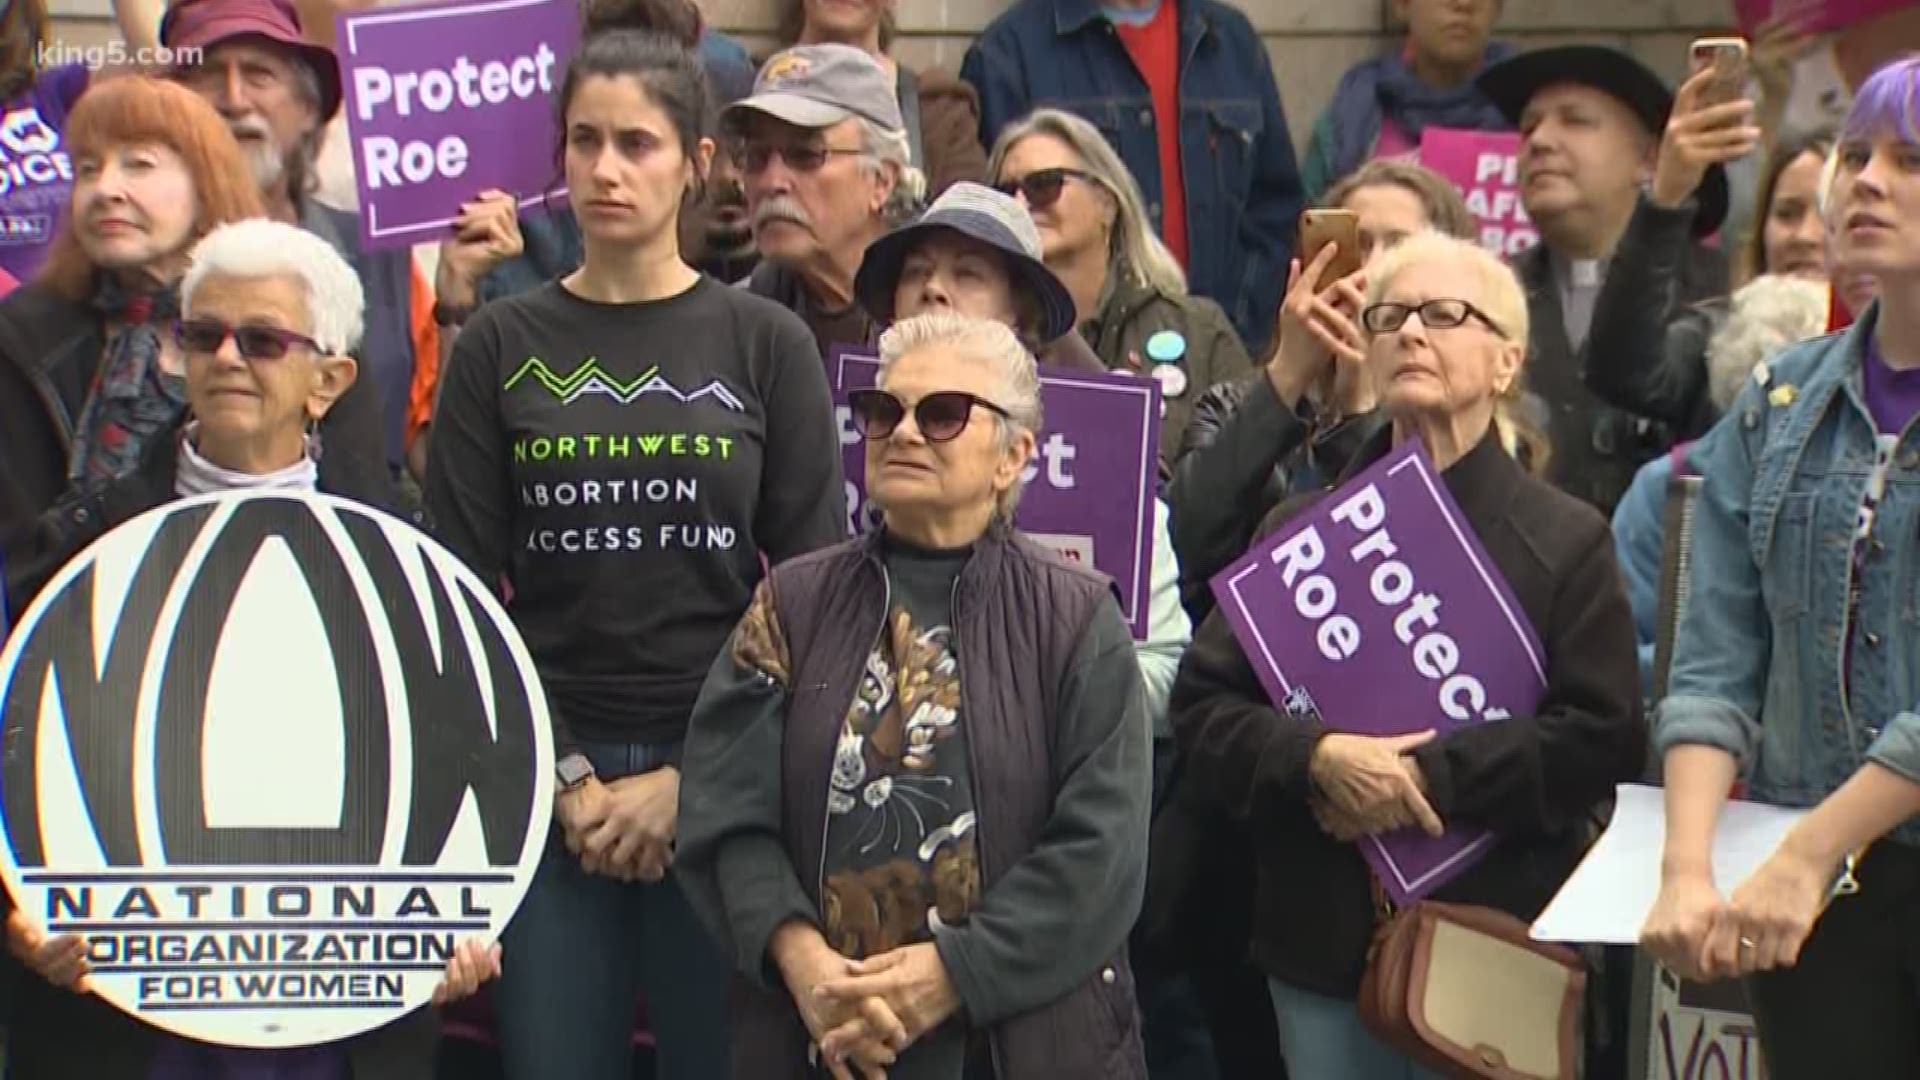 People gathered in Washington state to protest abortion laws that passed across the United States in recent weeks. KING 5's Kalie Greenberg reports.